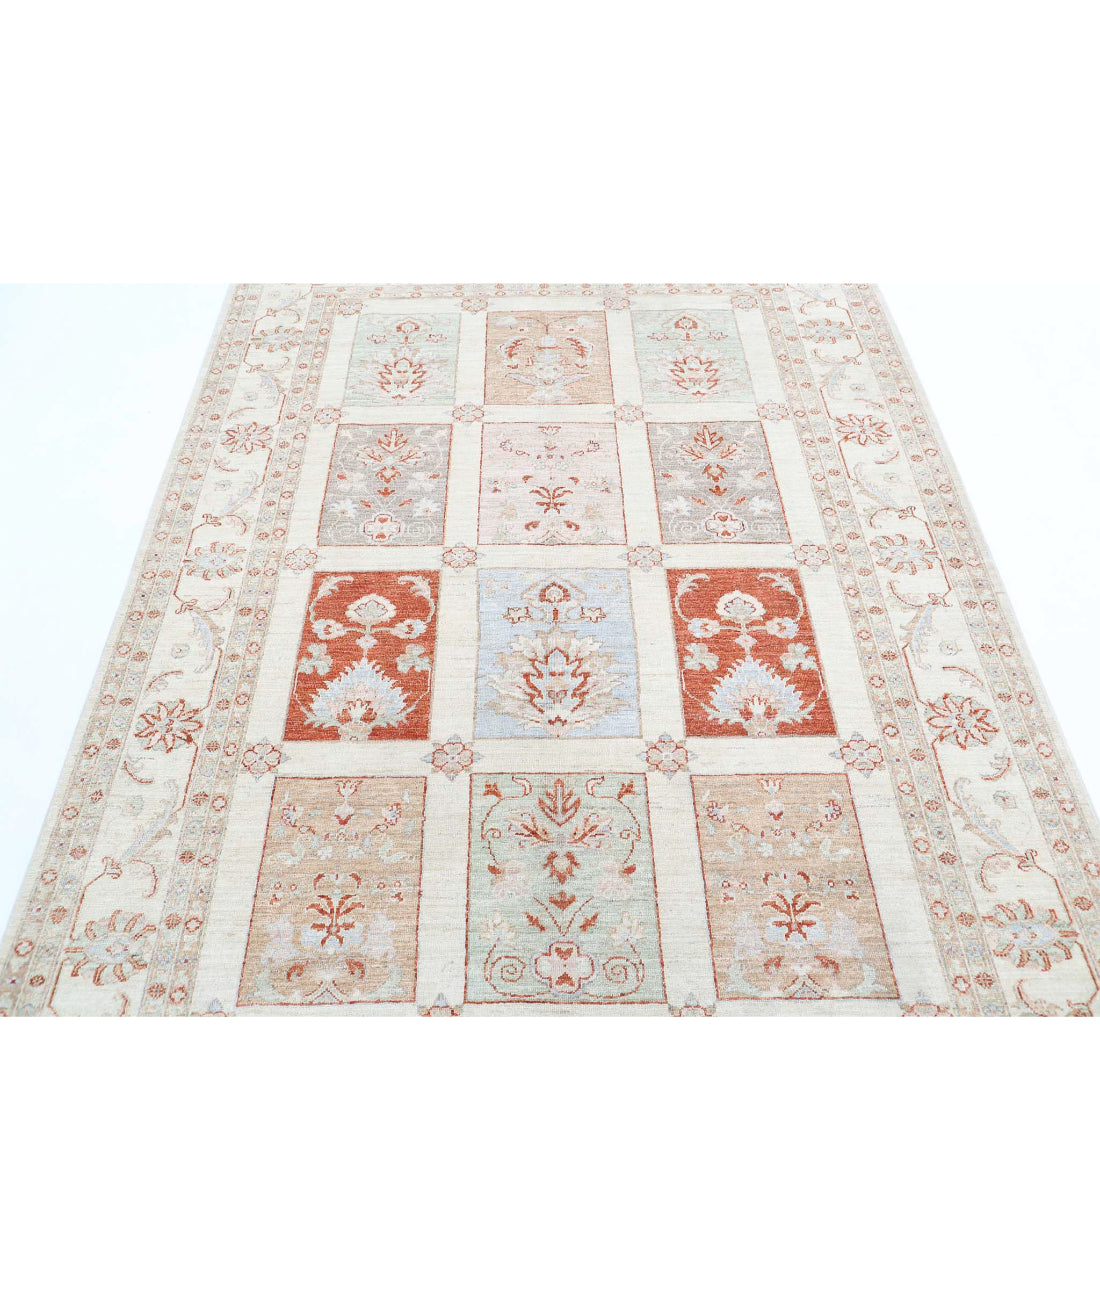 Hand Knotted Serenity Wool Rug - 5'6'' x 7'7'' 5'6'' x 7'7'' (165 X 228) / Ivory / Red